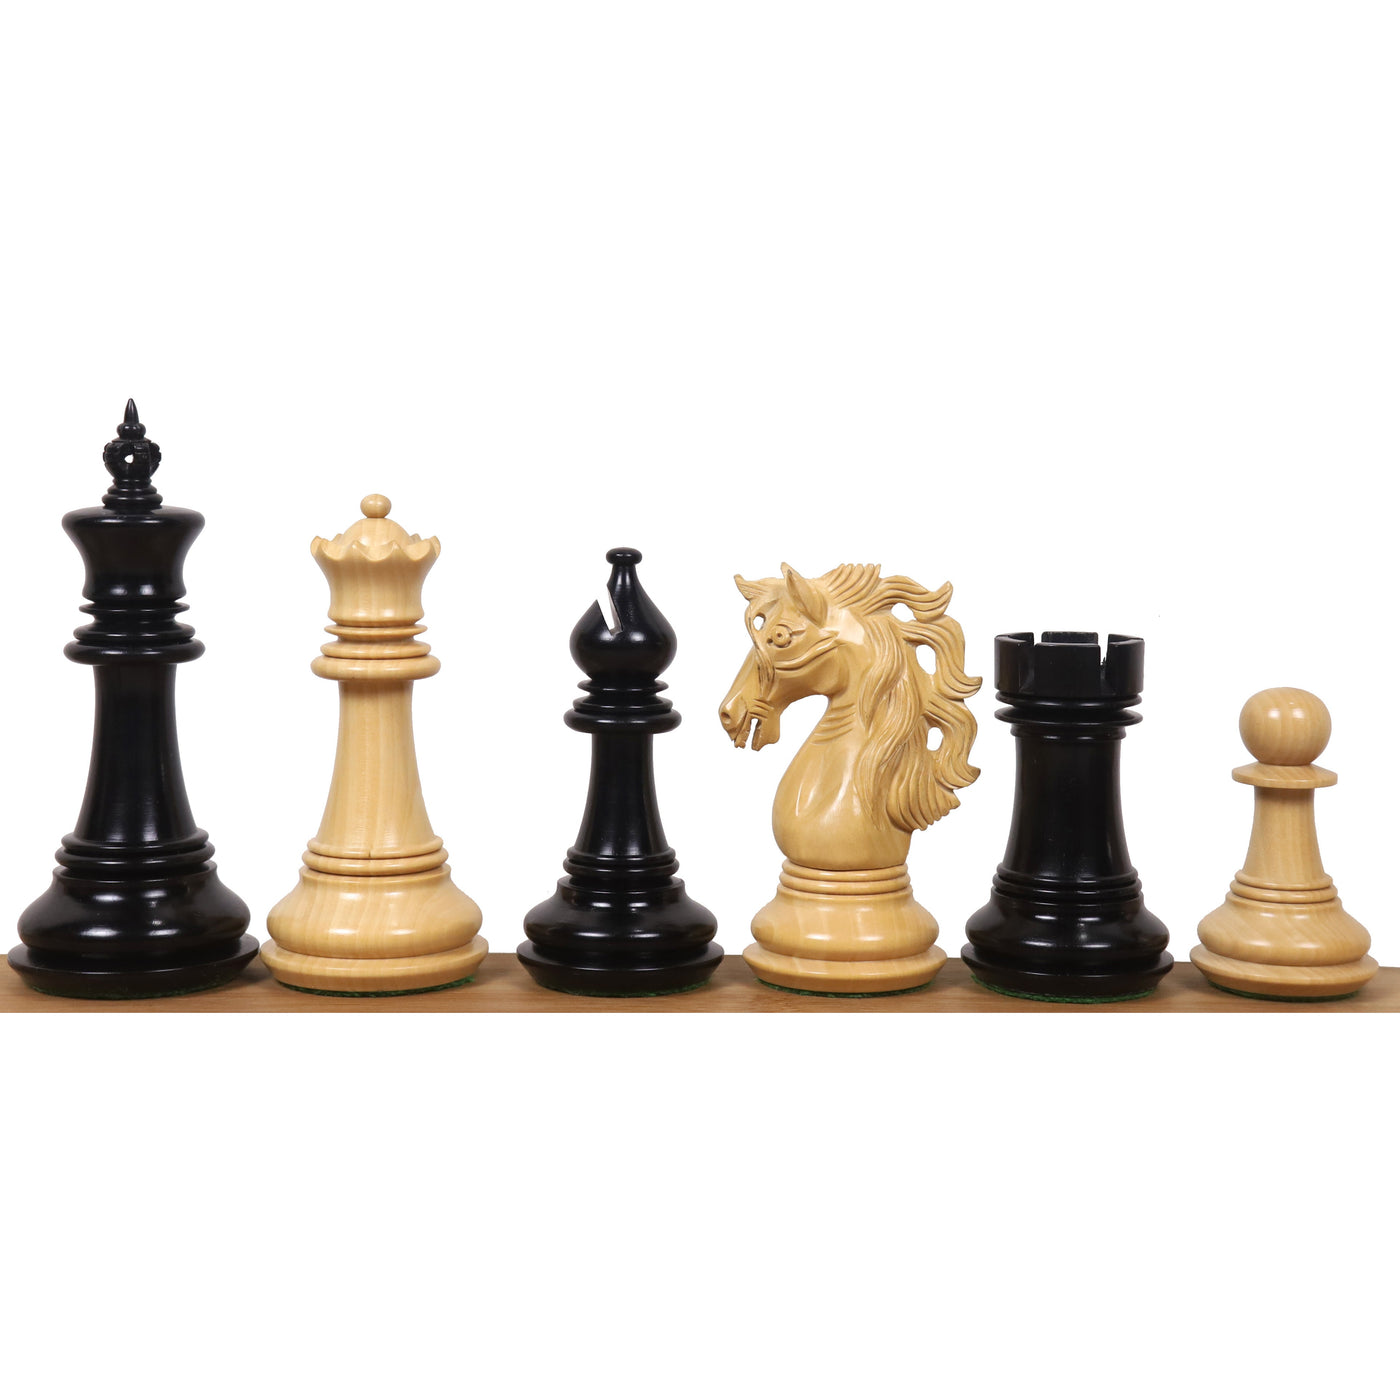 Combo of 4.6" Spartacus Luxury Staunton Chess Set - Pieces in Ebony Wood with 23" Large Ebony & Maple Wood Chessboard and Storage Box